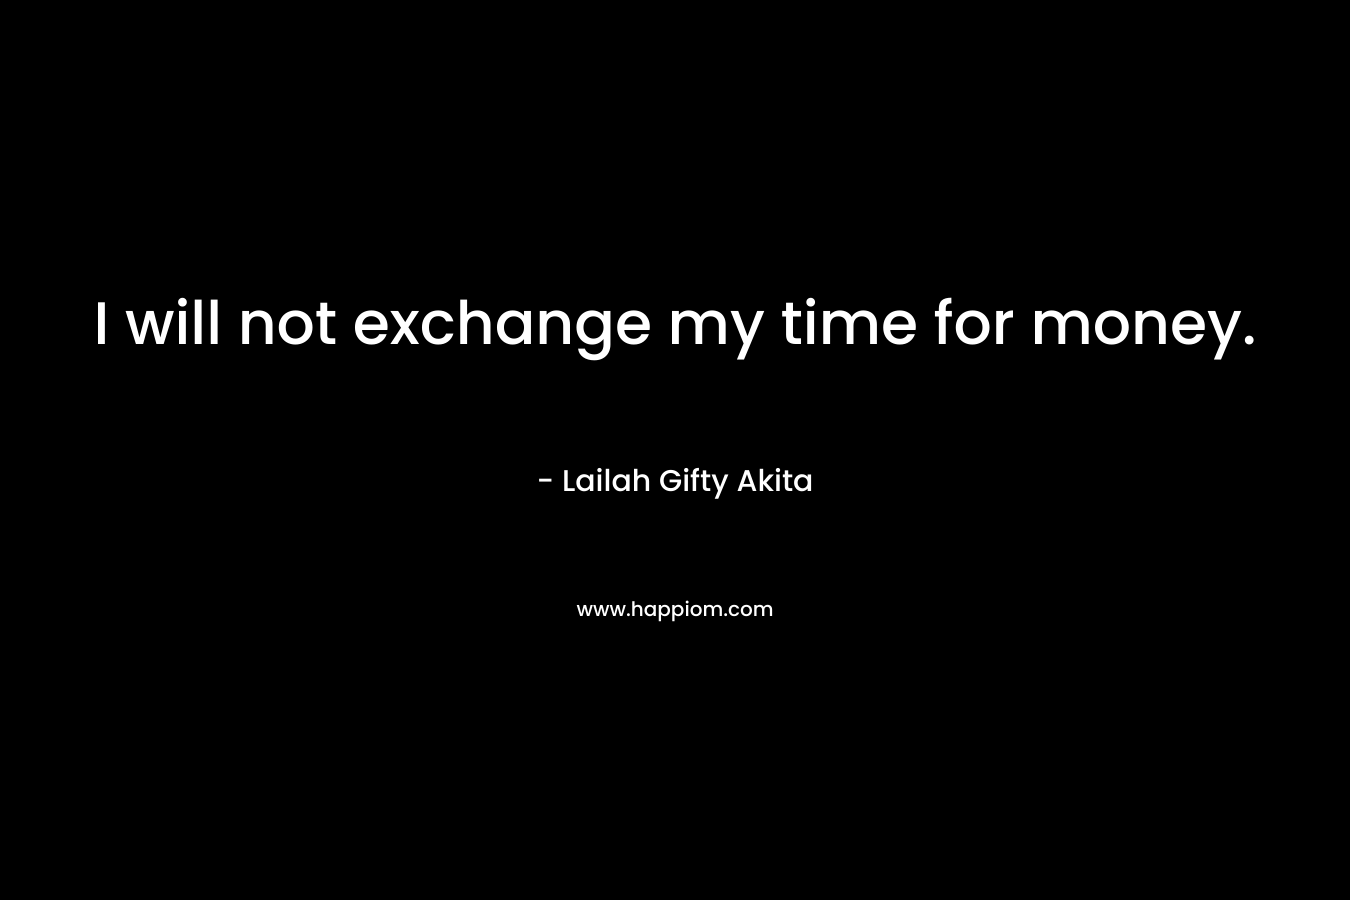 I will not exchange my time for money.